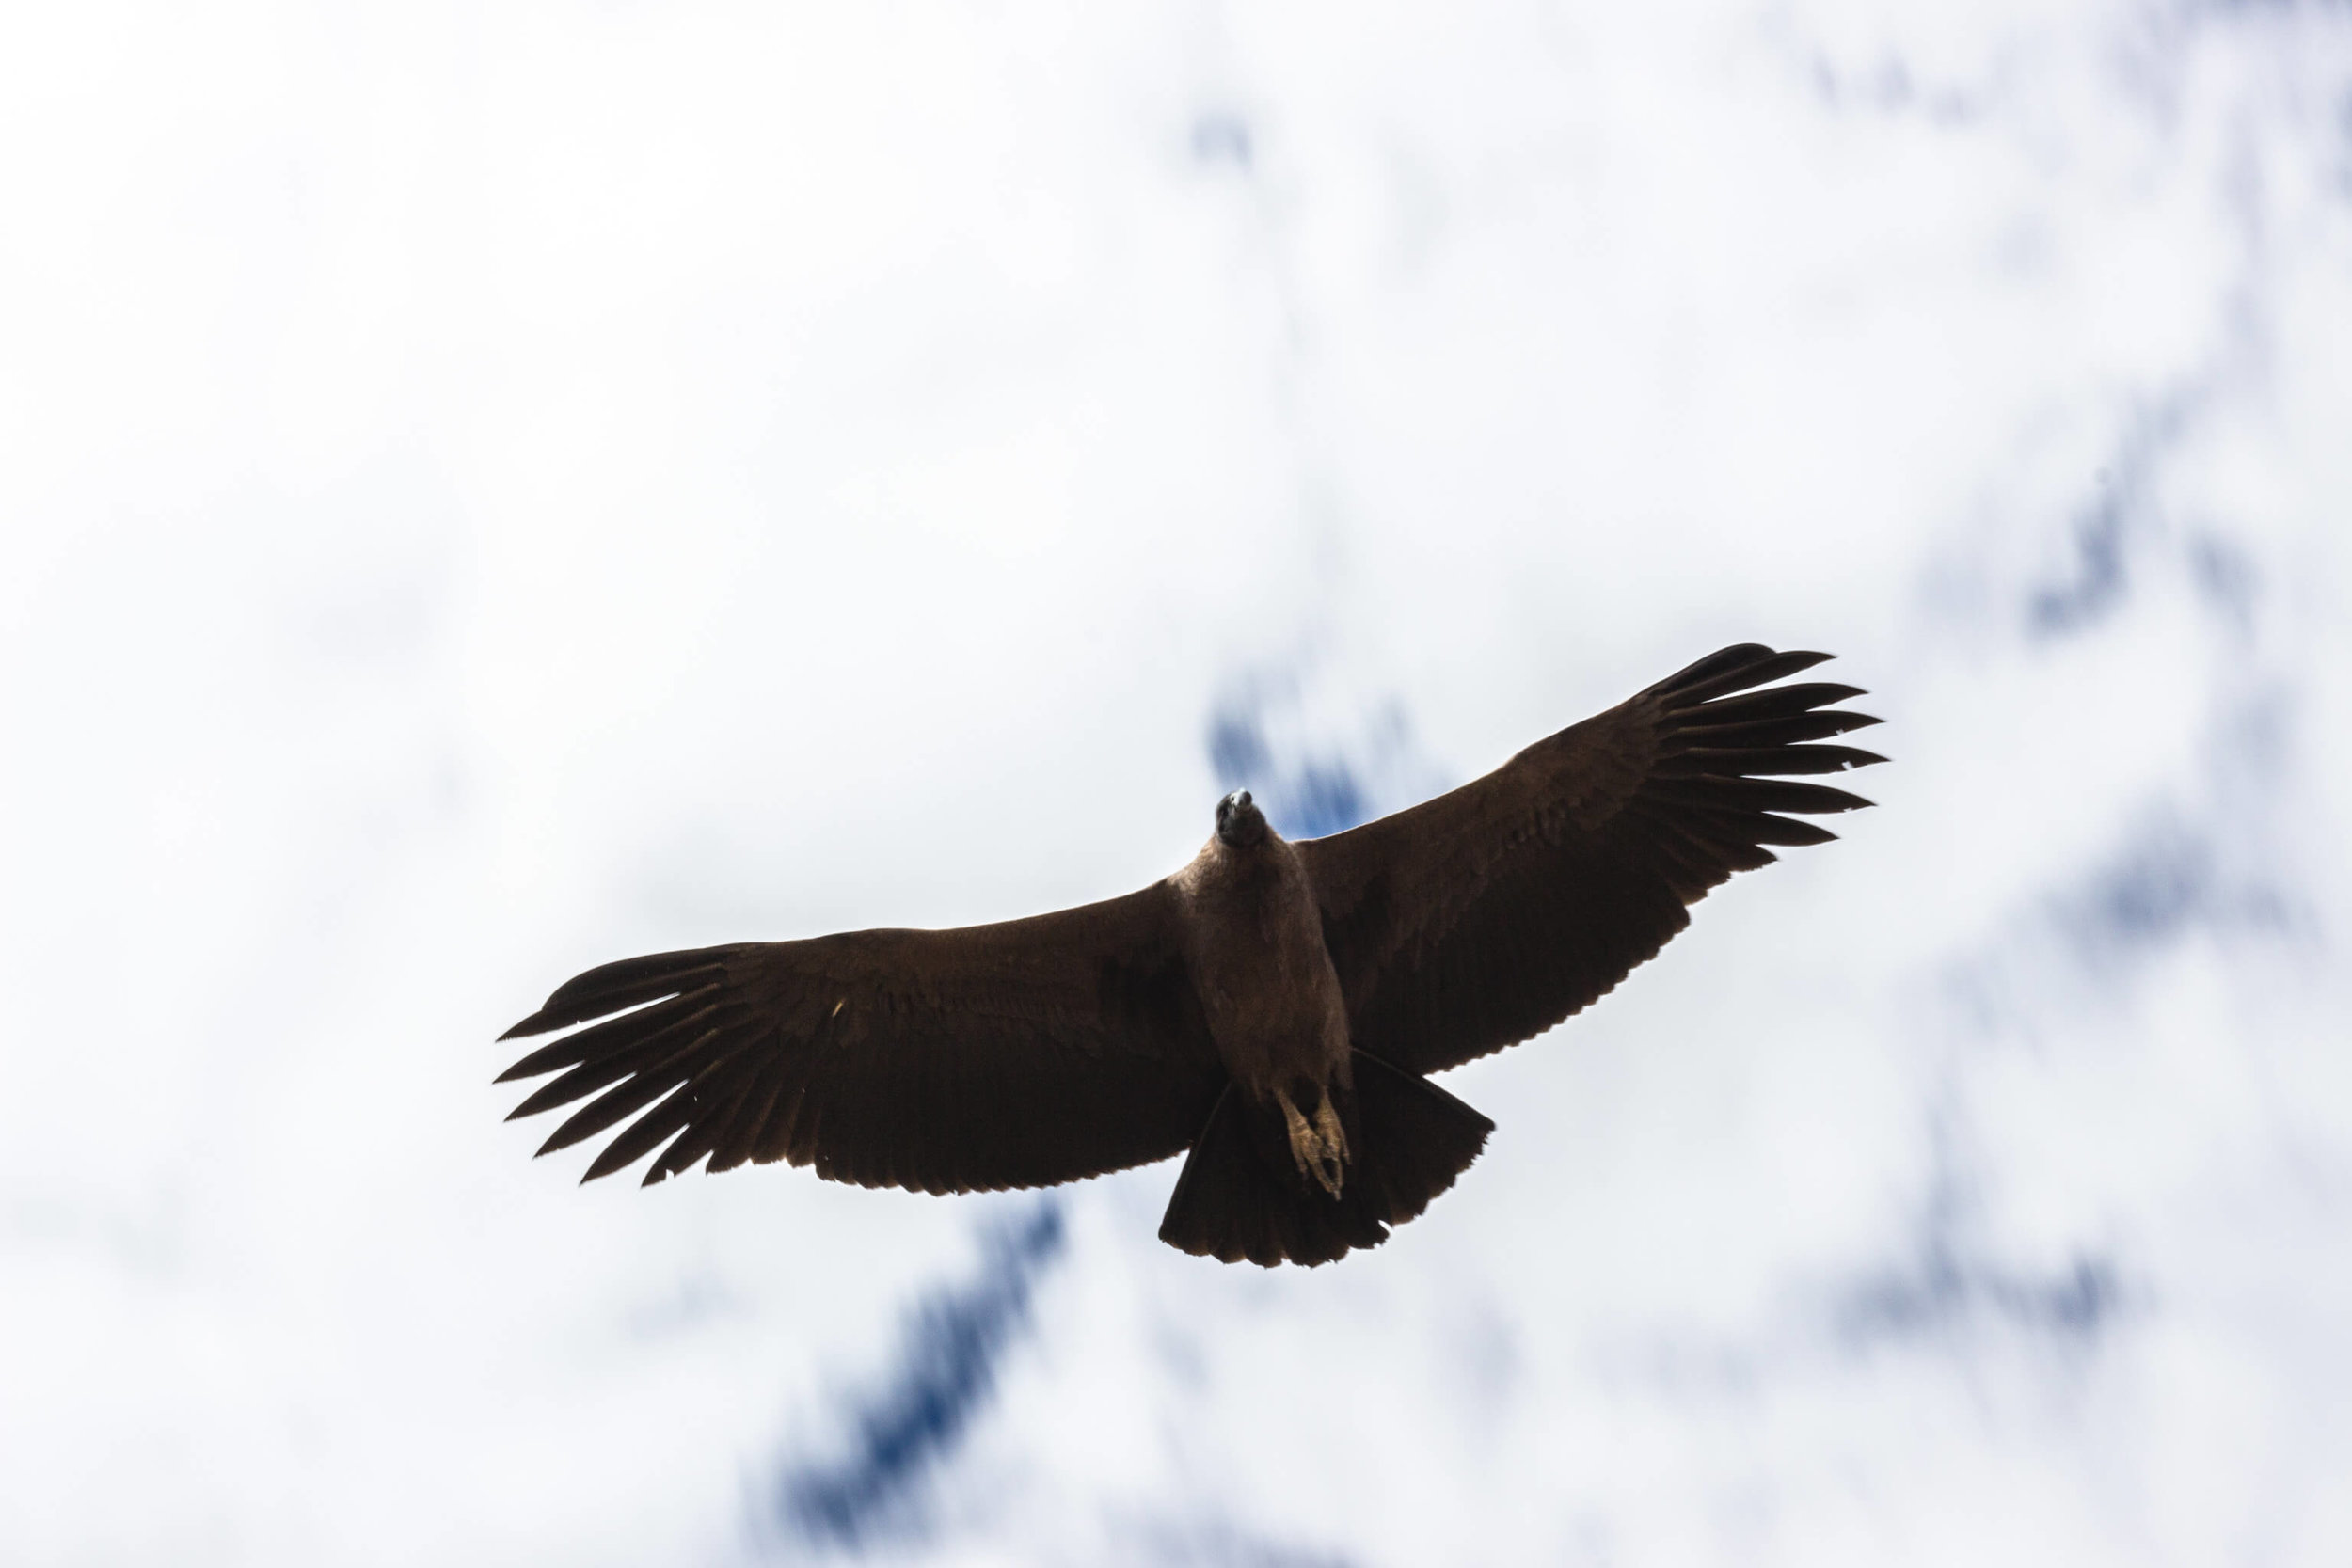 The Condor Flight by Le Foyer Tours